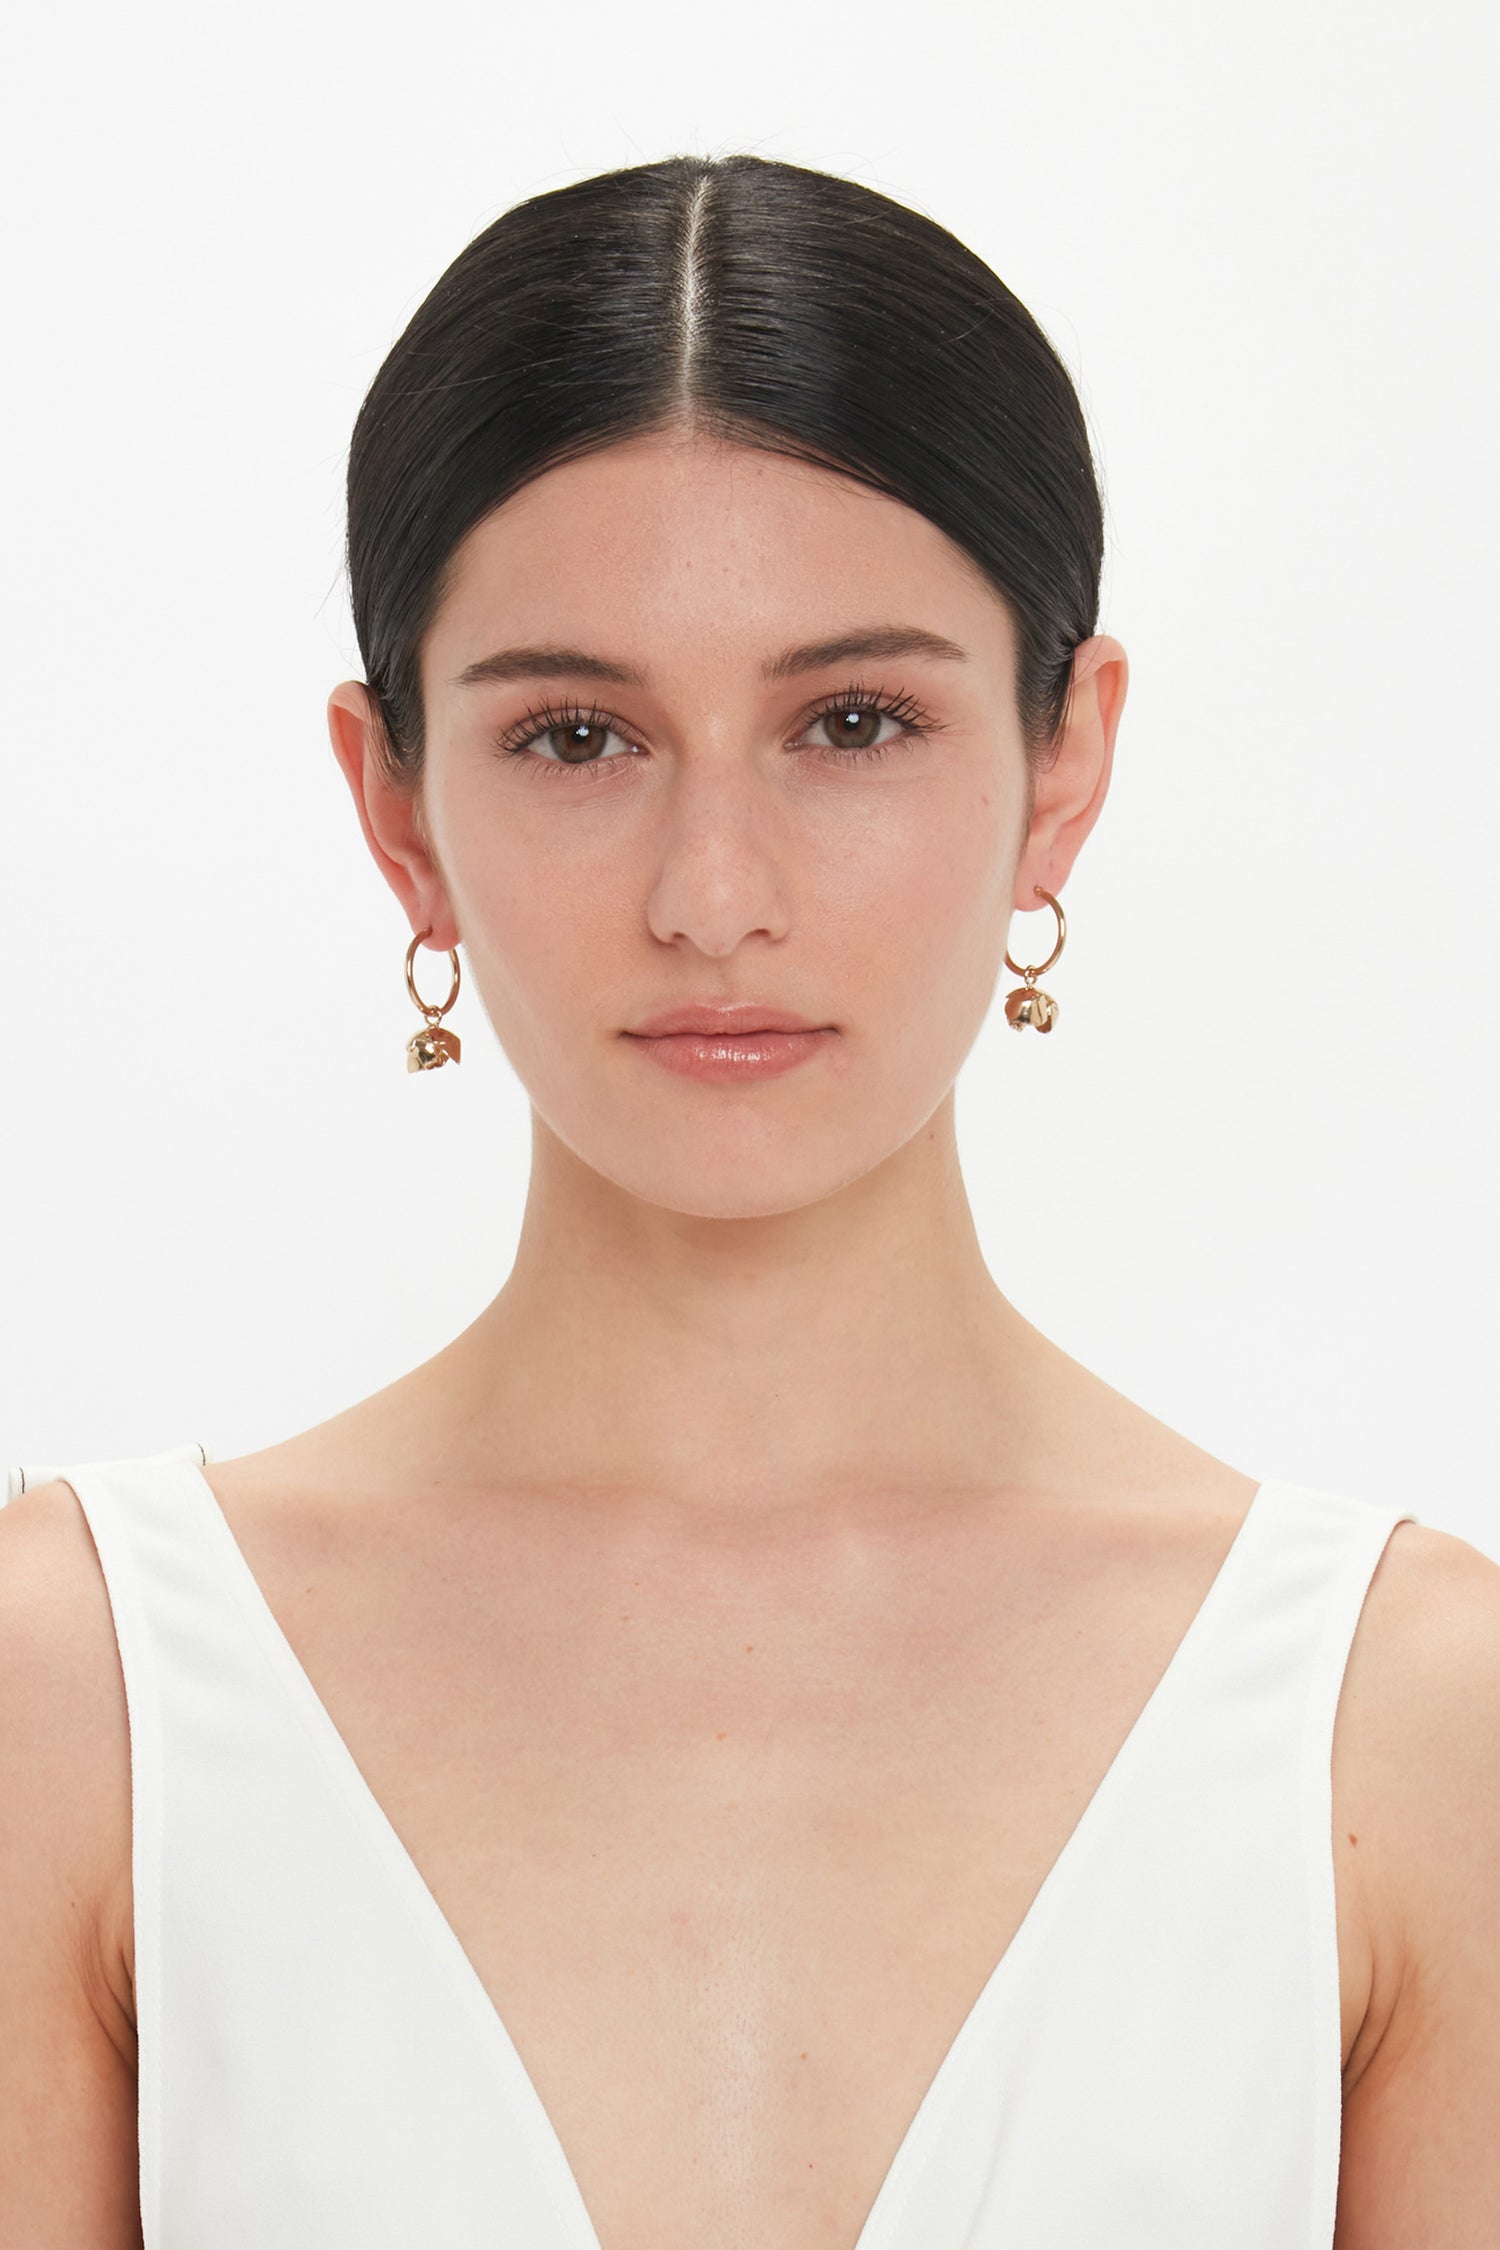 A woman with straight dark hair is wearing a white sleeveless top and Exclusive Camellia Flower Hoop Earrings In Gold by Victoria Beckham. She has a neutral expression and is looking directly at the camera. The intricate earrings are hand-crafted in Italy, adding a touch of elegance to her look.